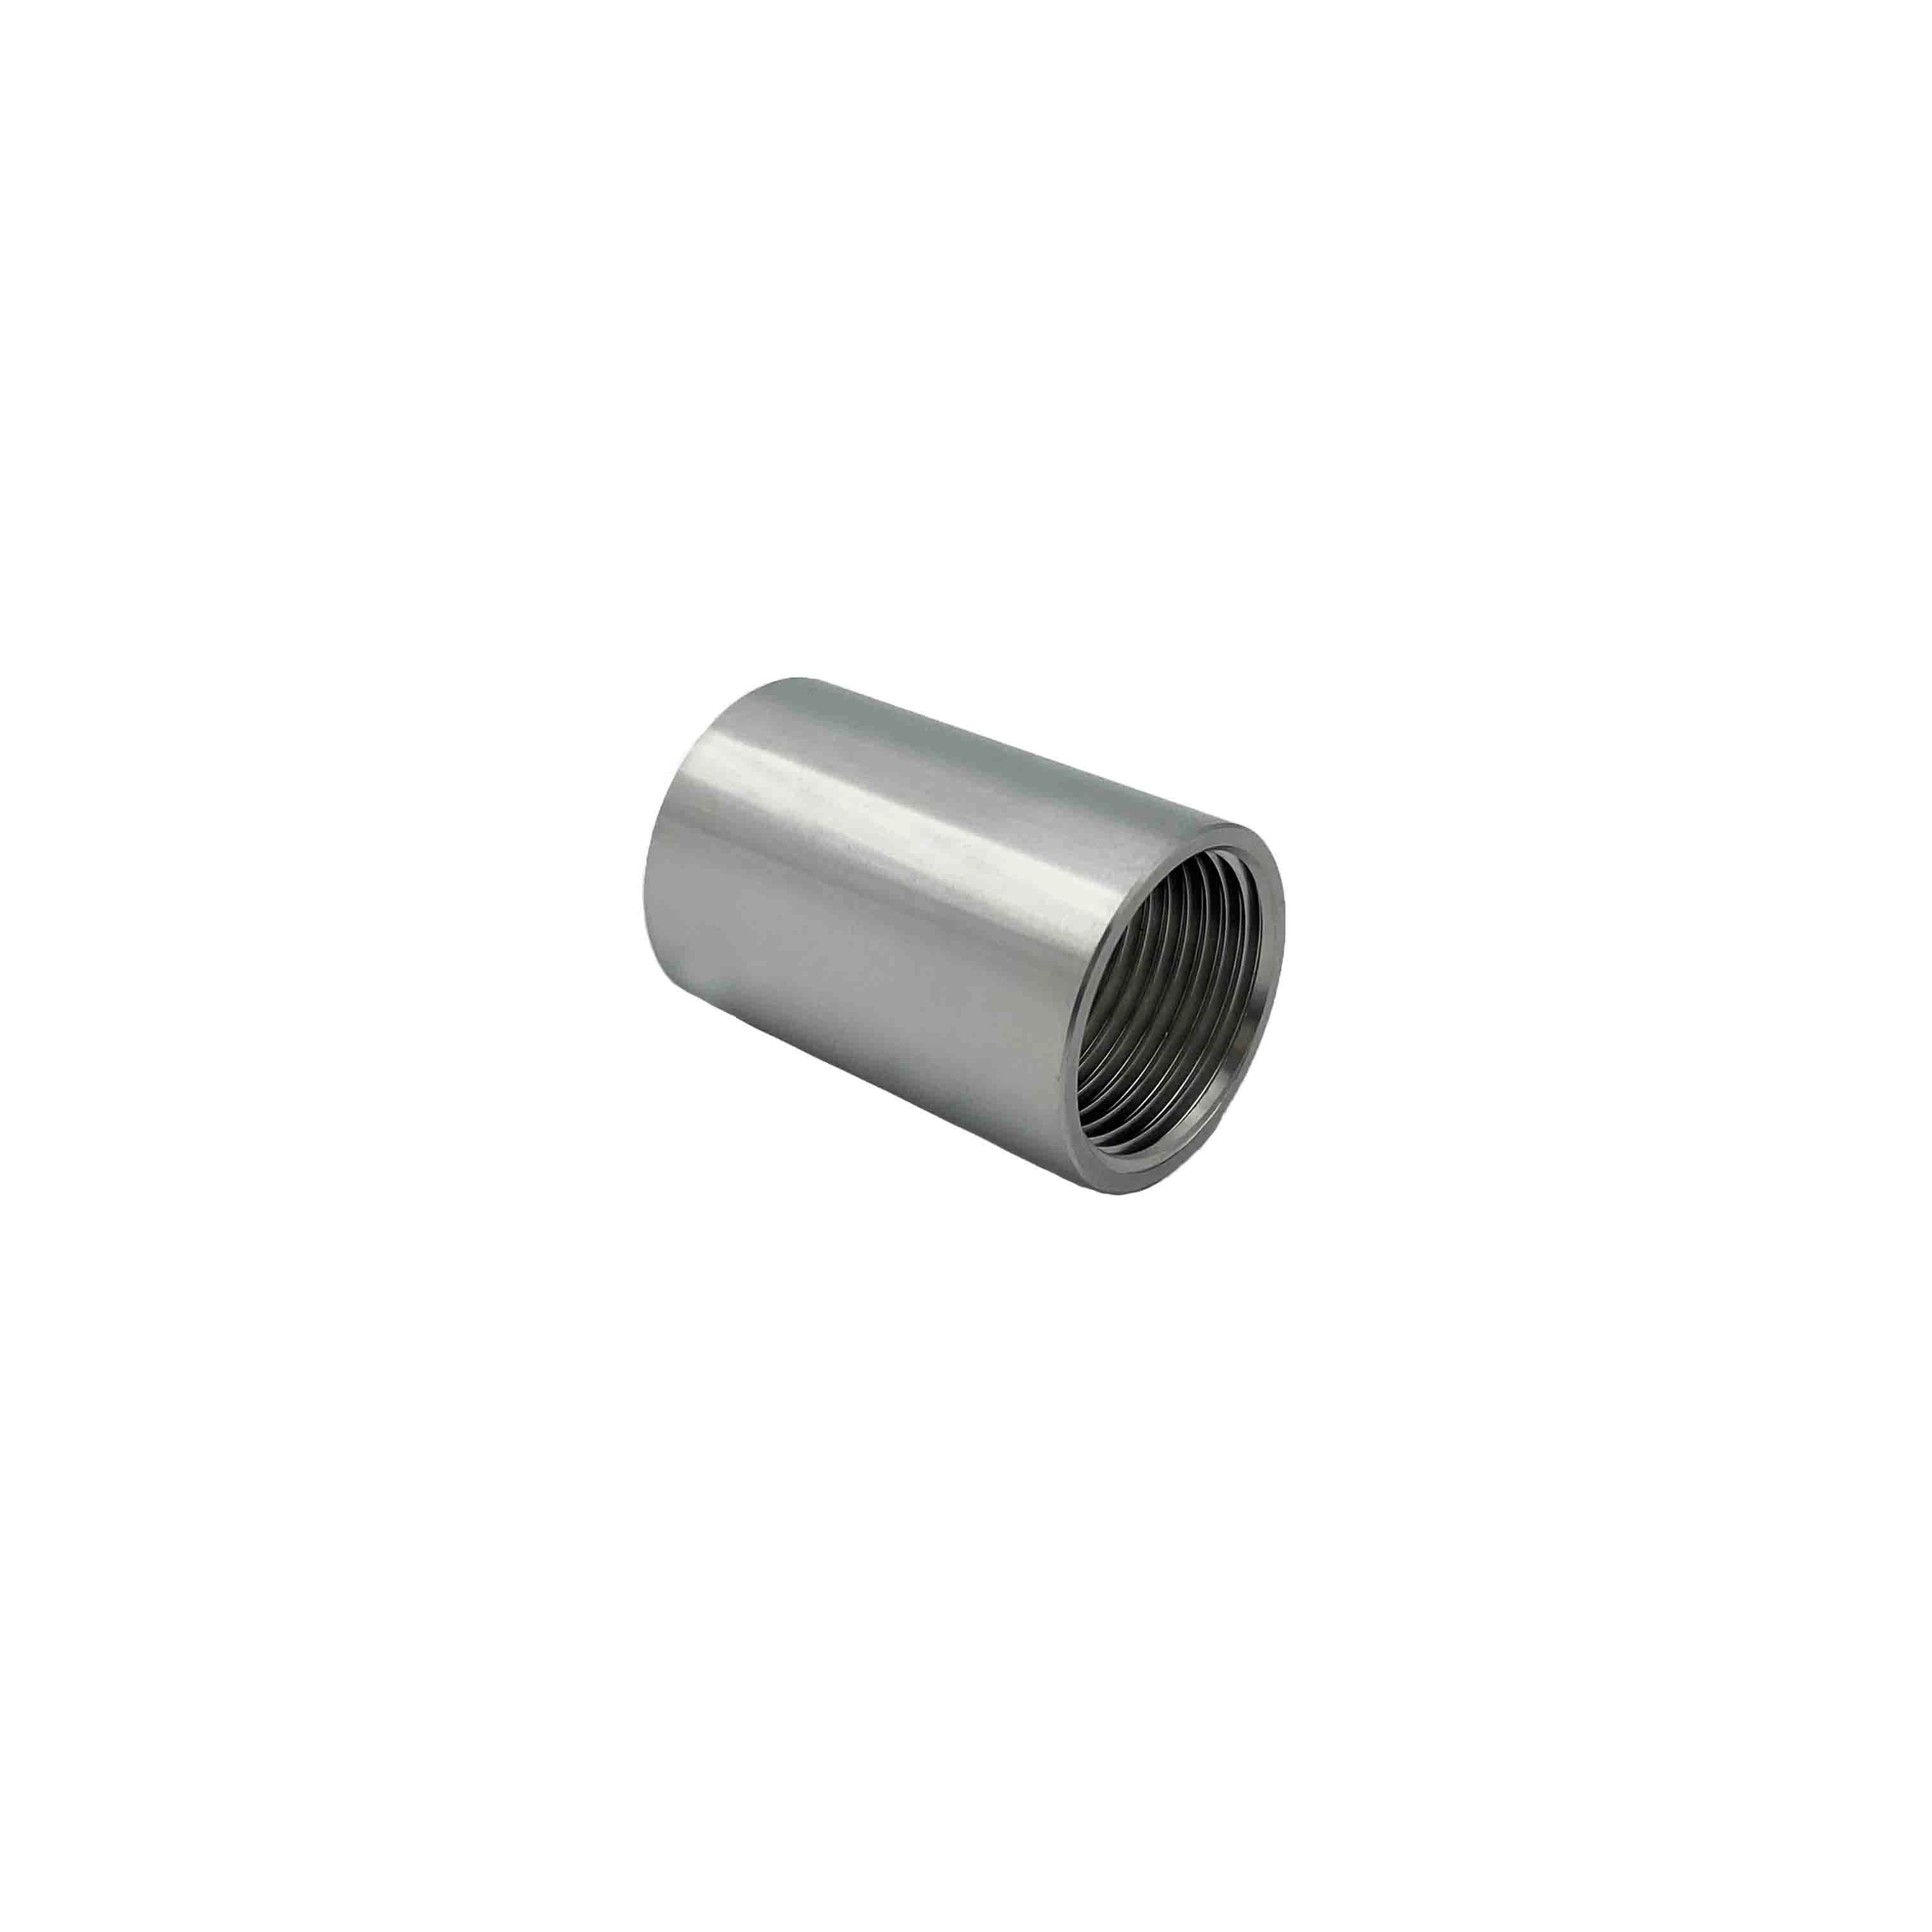 SS female pipe fittings stainless steel no tee conenctor all thread full male female coupling fitting